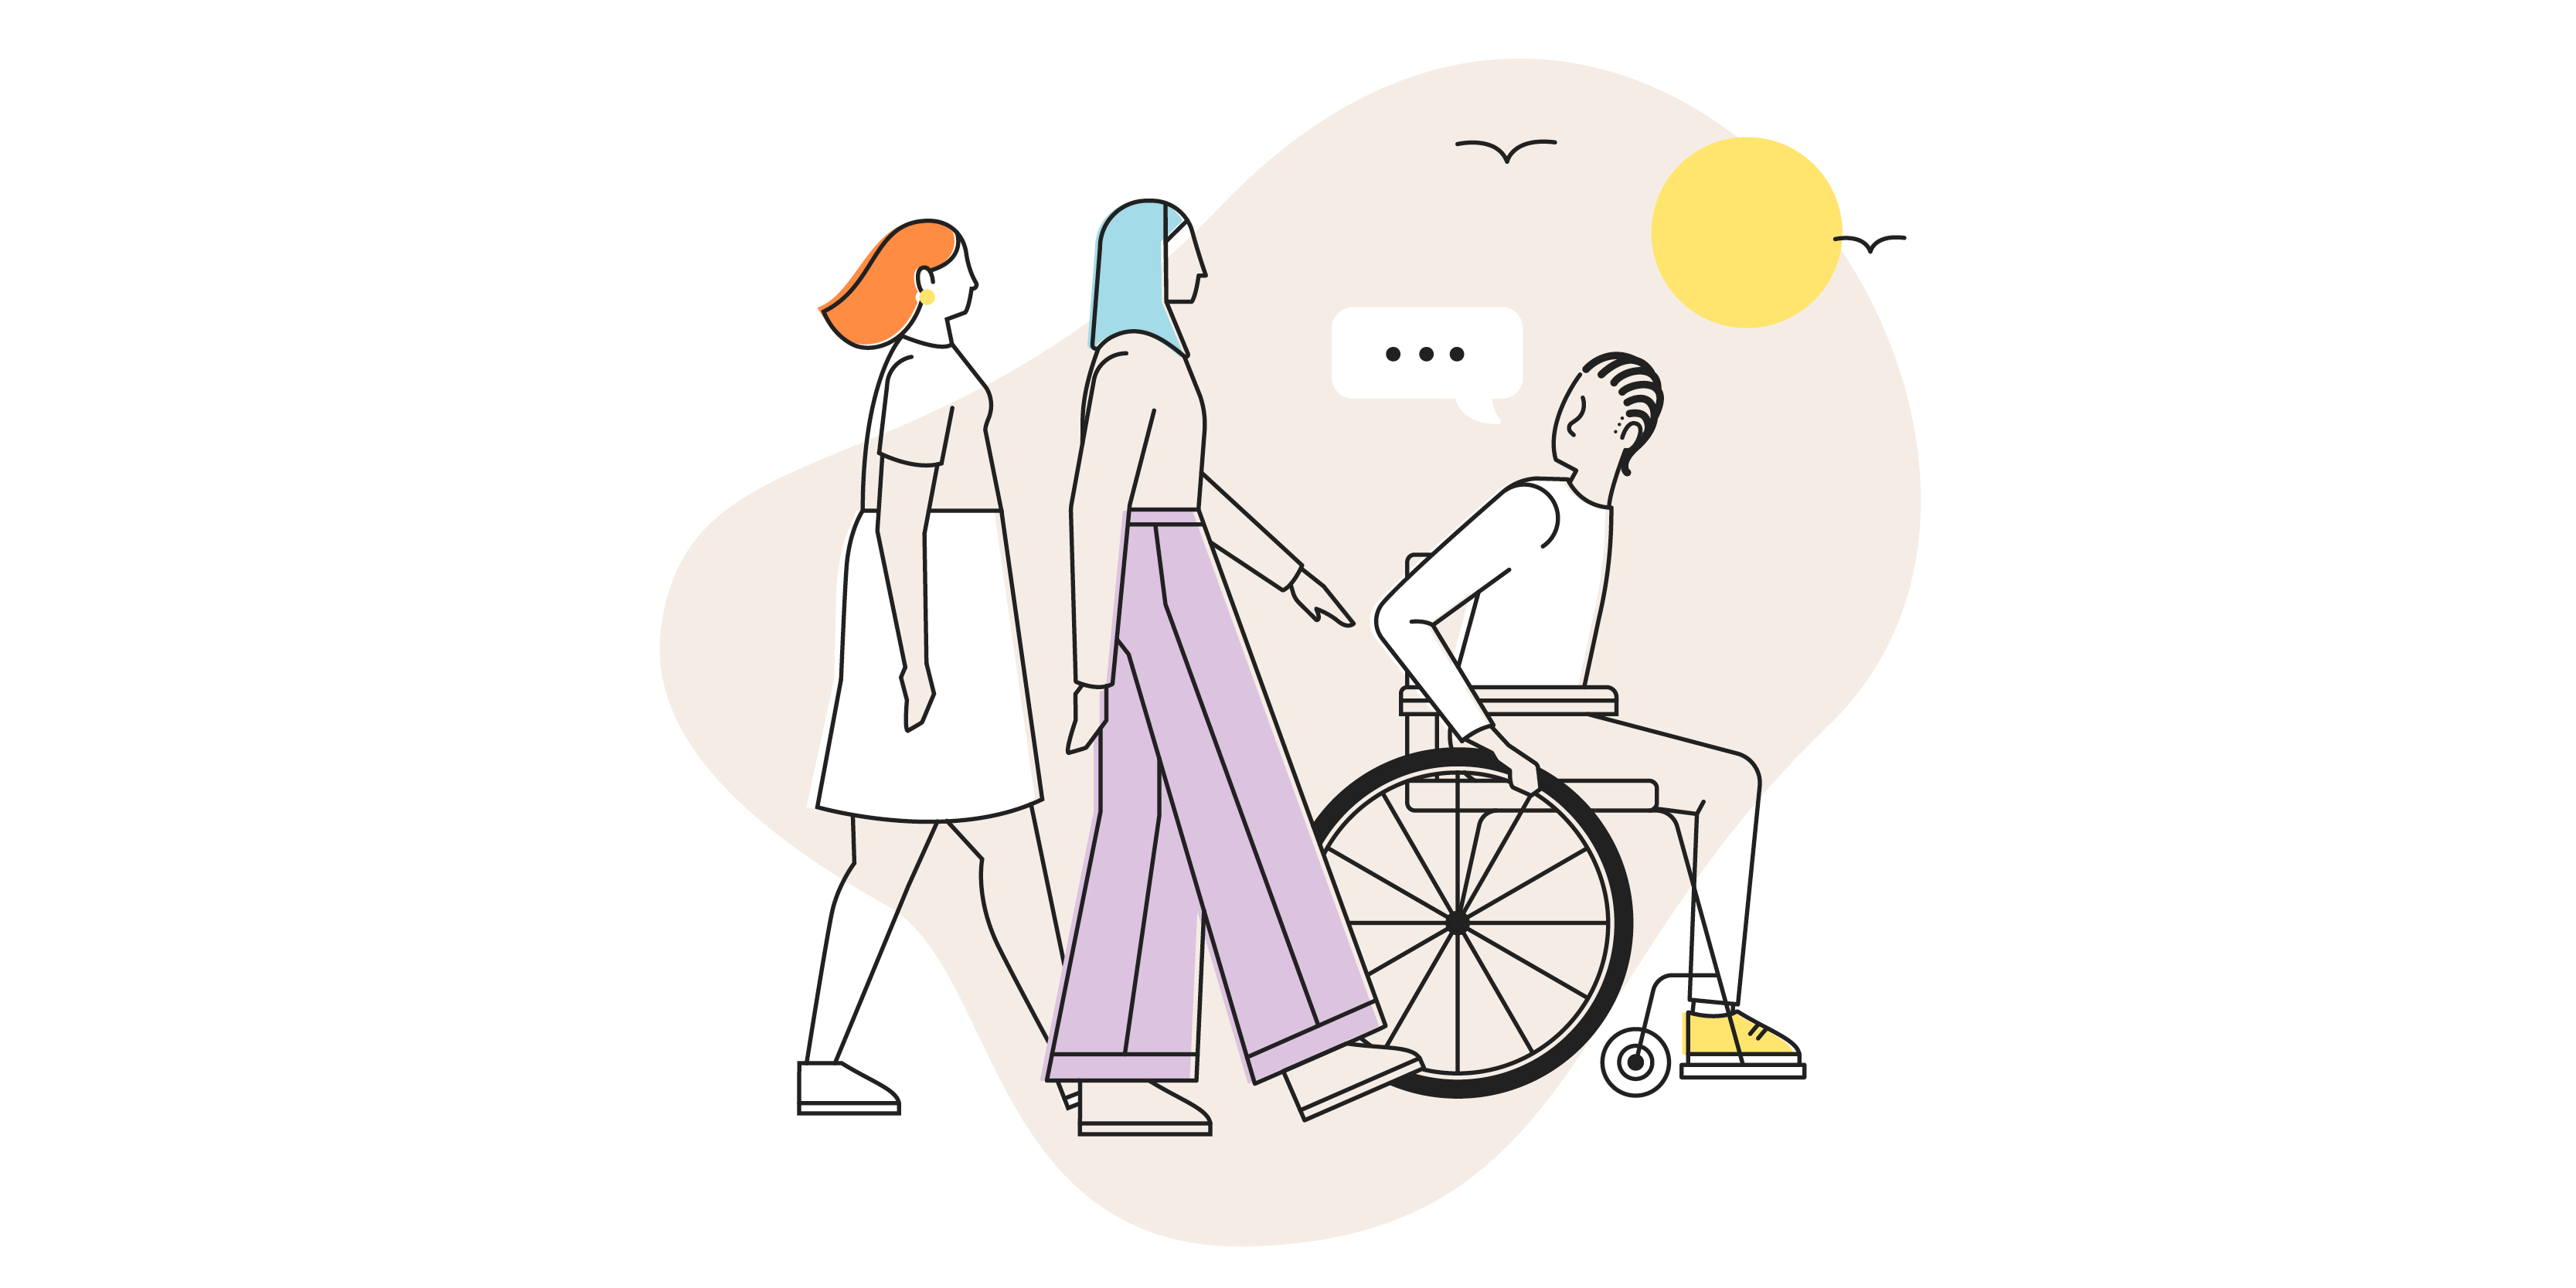 Graphic of a member of staff in a wheelchair together with two other colleagues who are talking and connecting together, outside in the sunshine.